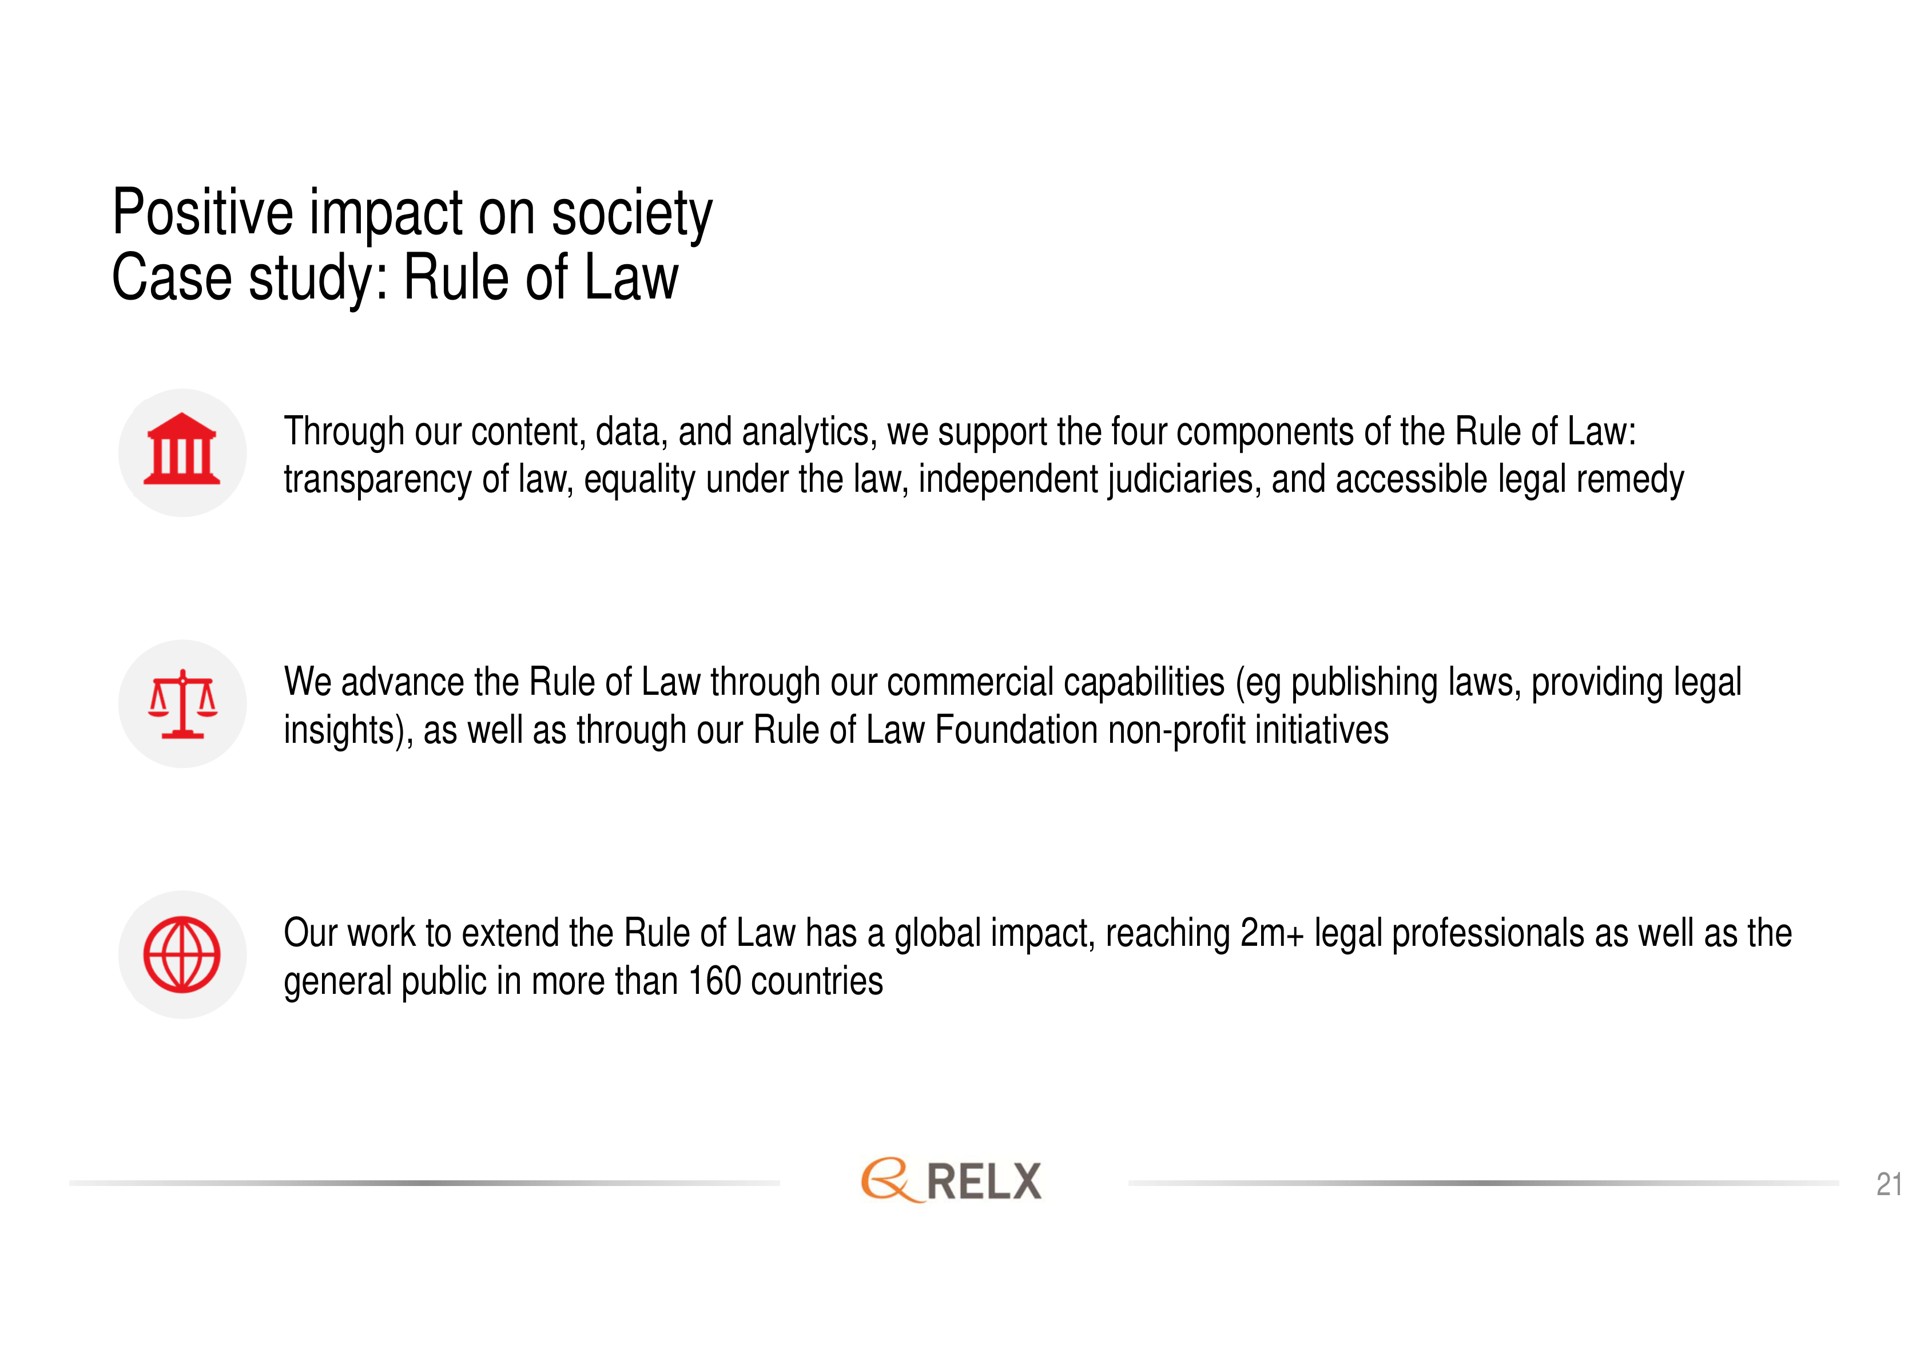 positive impact on society case study rule of law | RELX